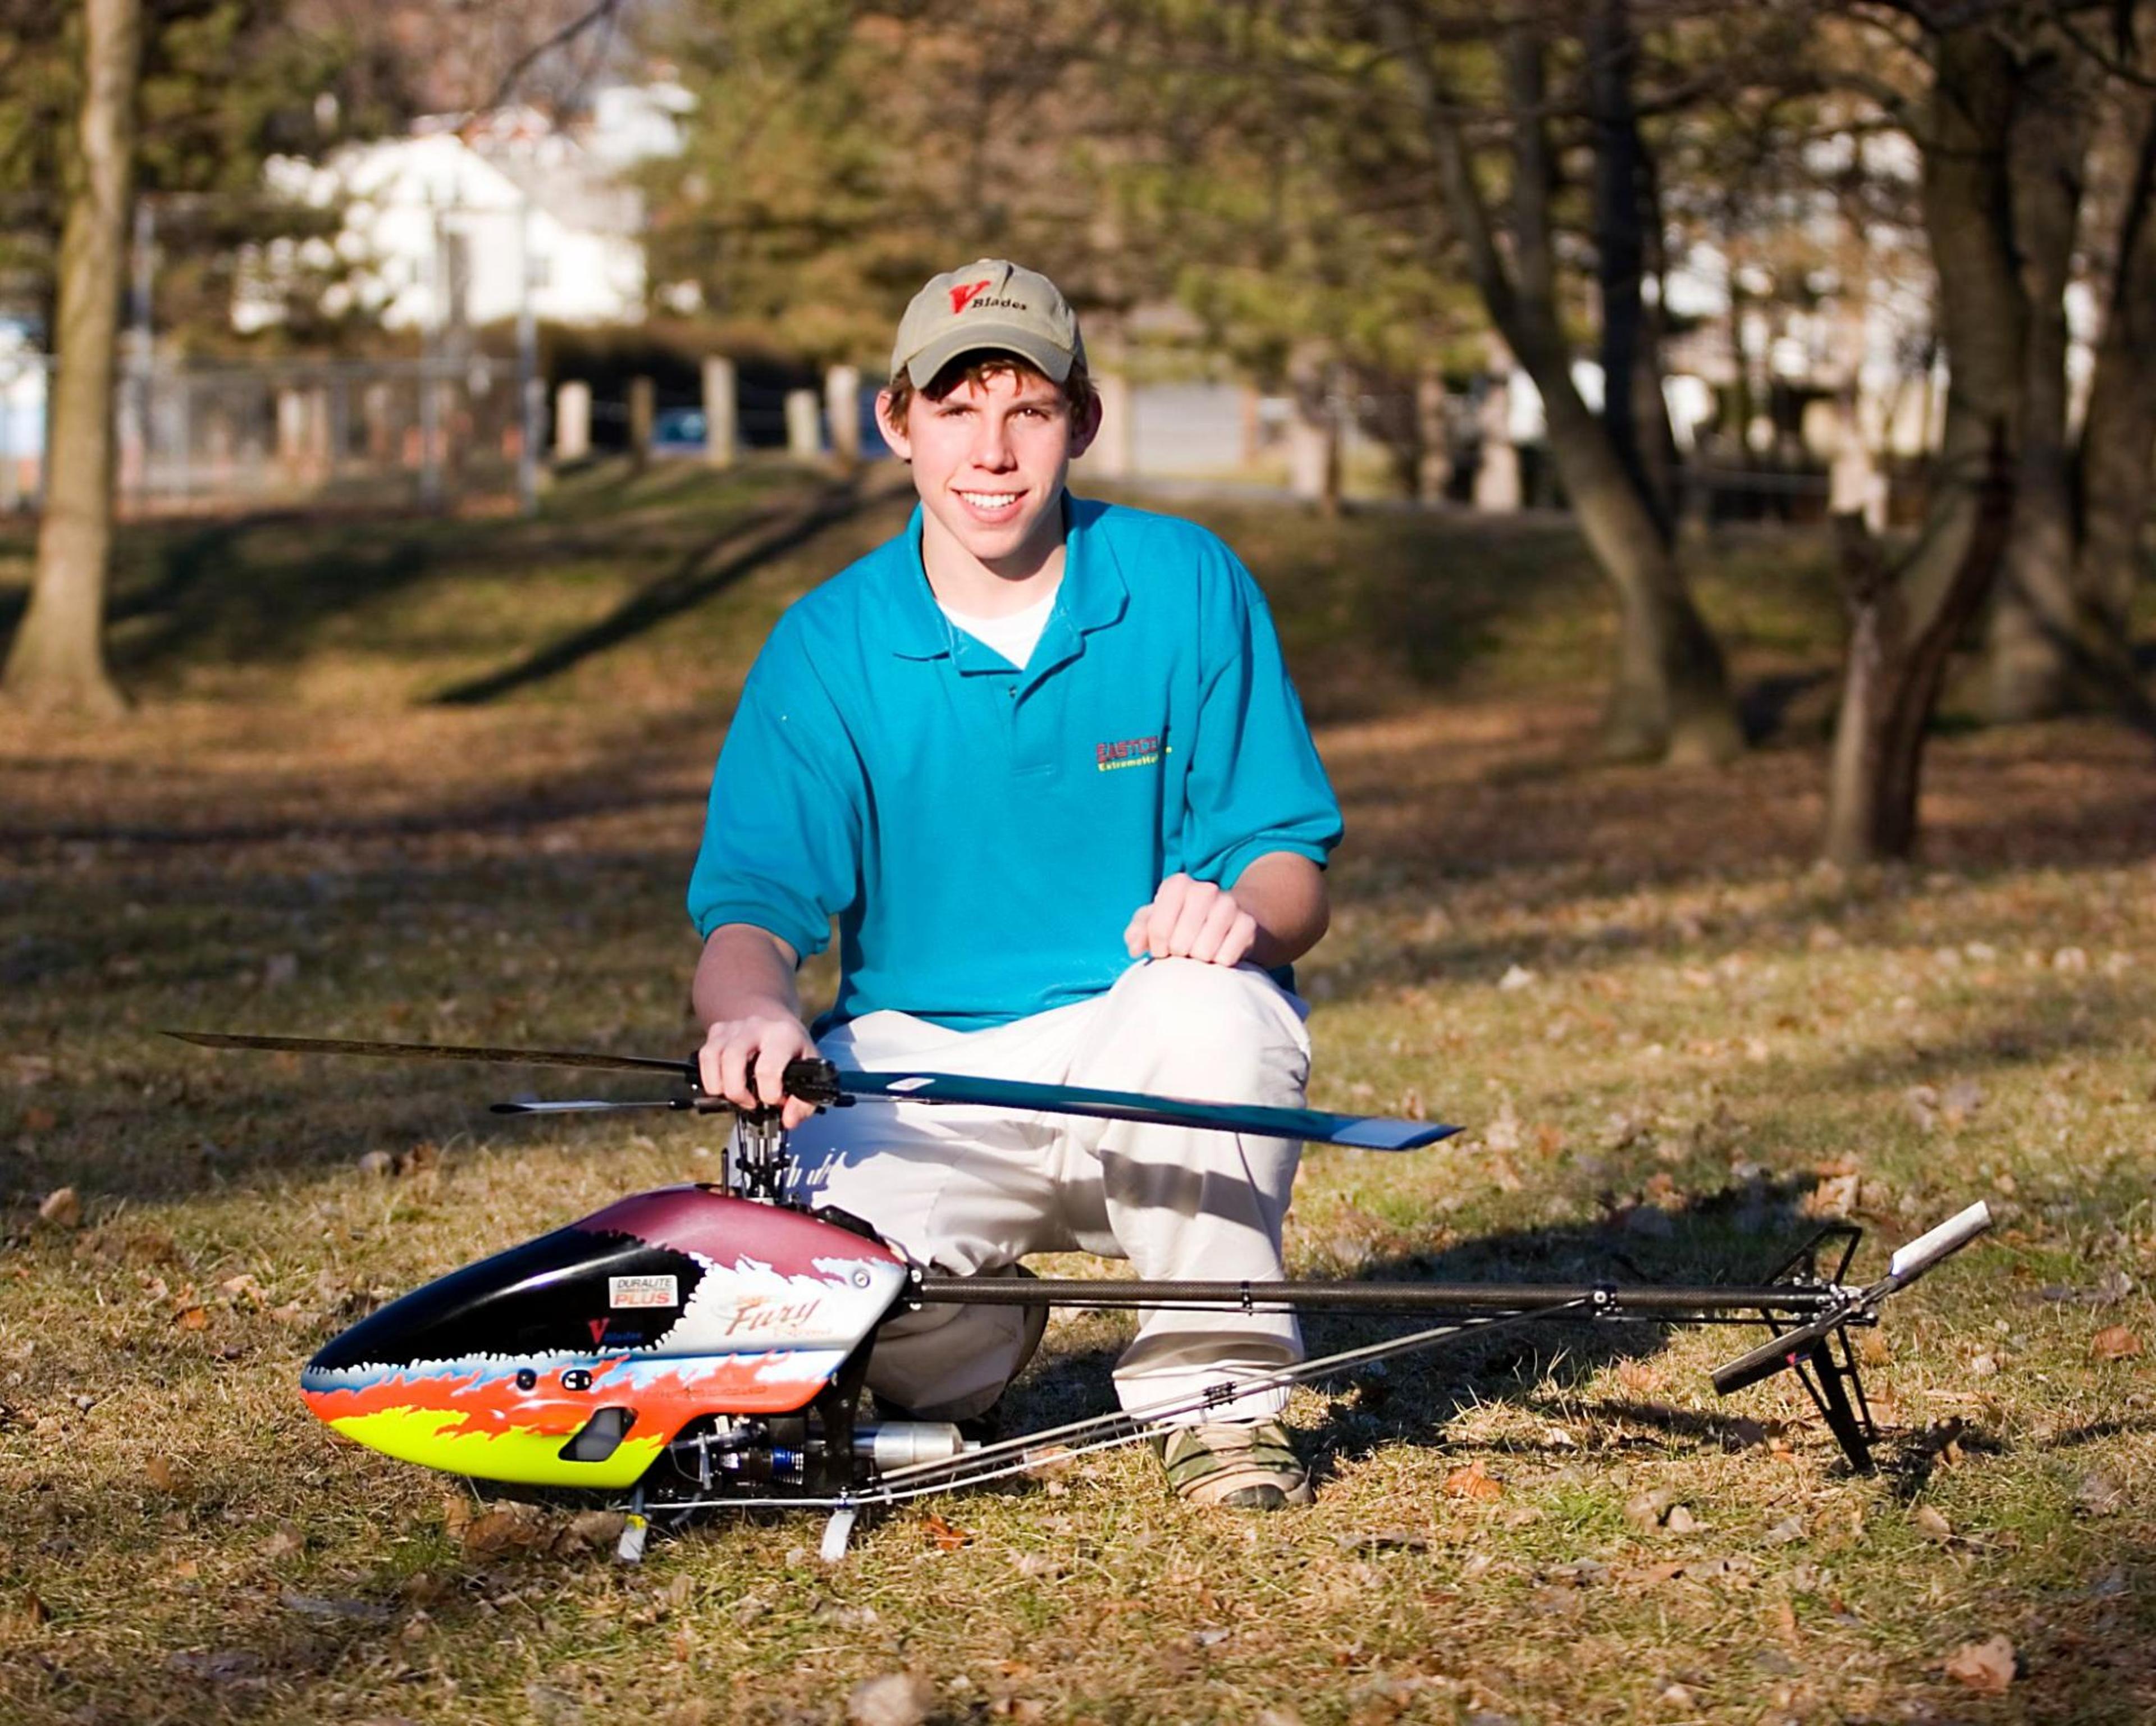 Bobby Watts with a RC helicopter.